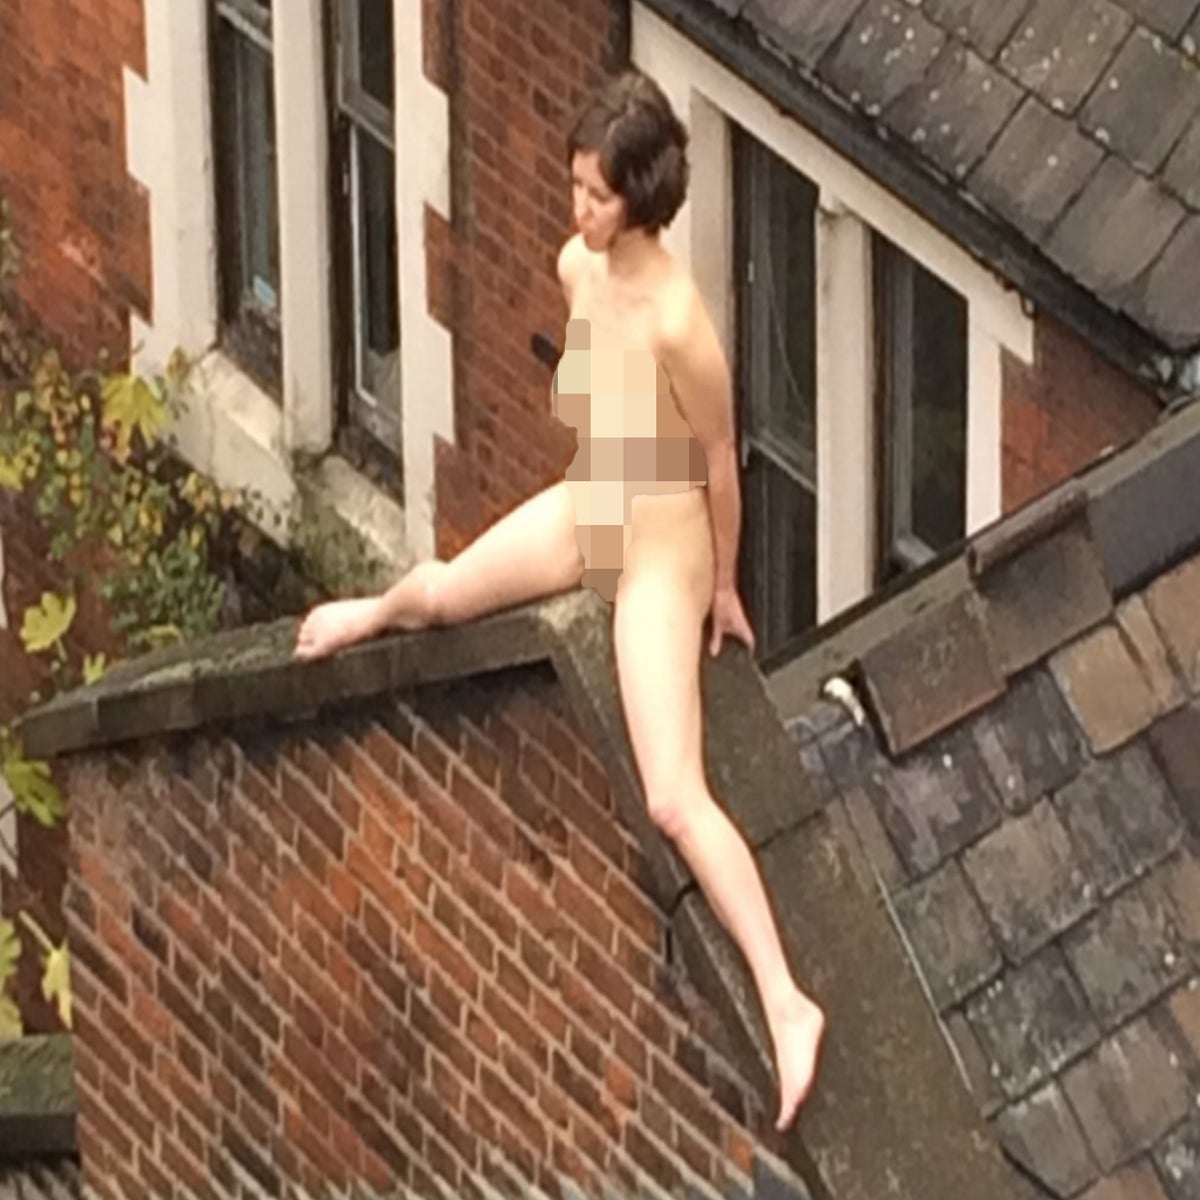 Confusion as naked woman spotted on roof of Toynbee Studios